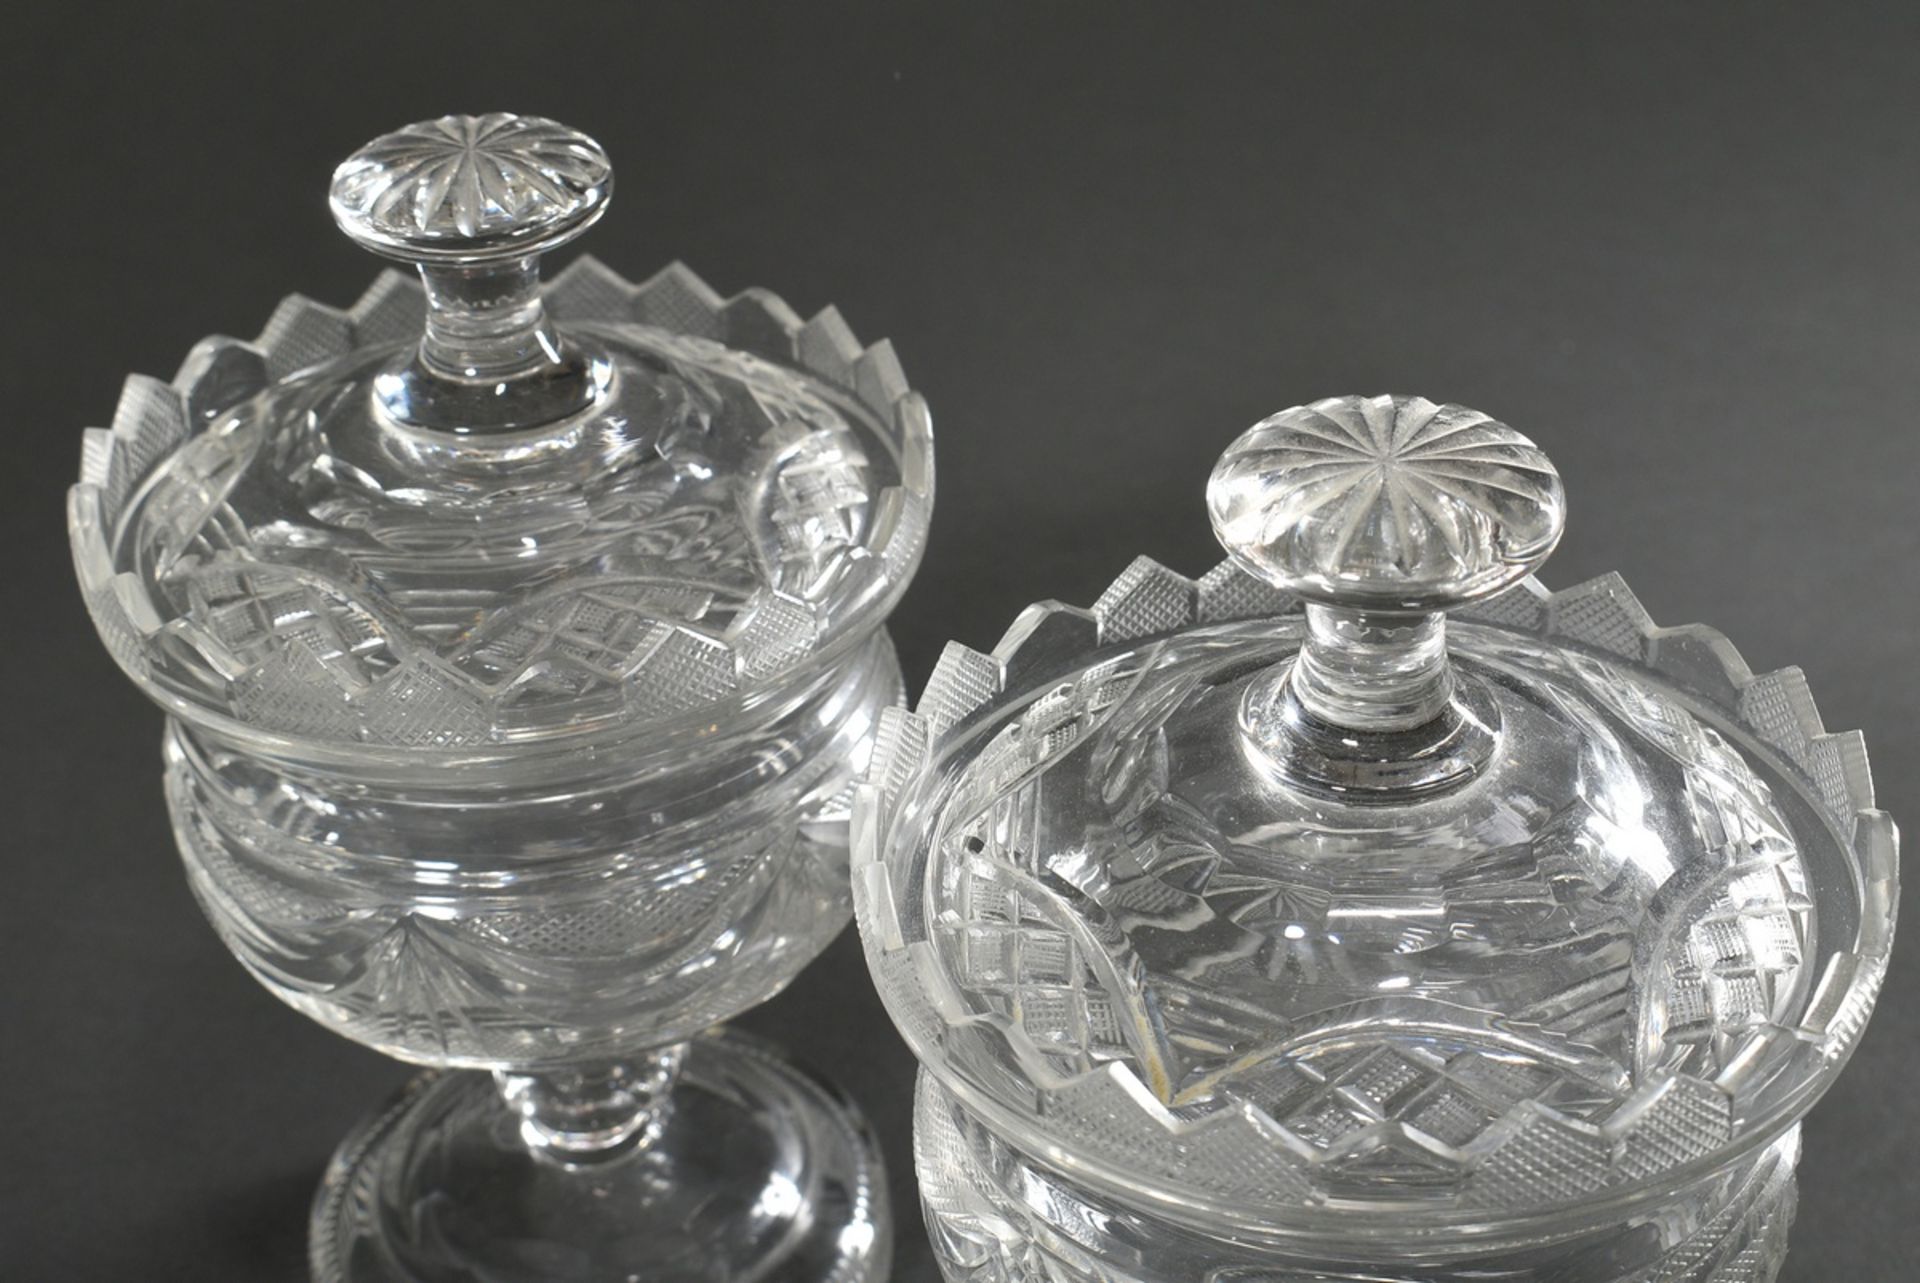 Pair of crystal lidded vessels with rich cut, garland decoration, 19th century, h. 19cm, rim crowns - Image 2 of 4